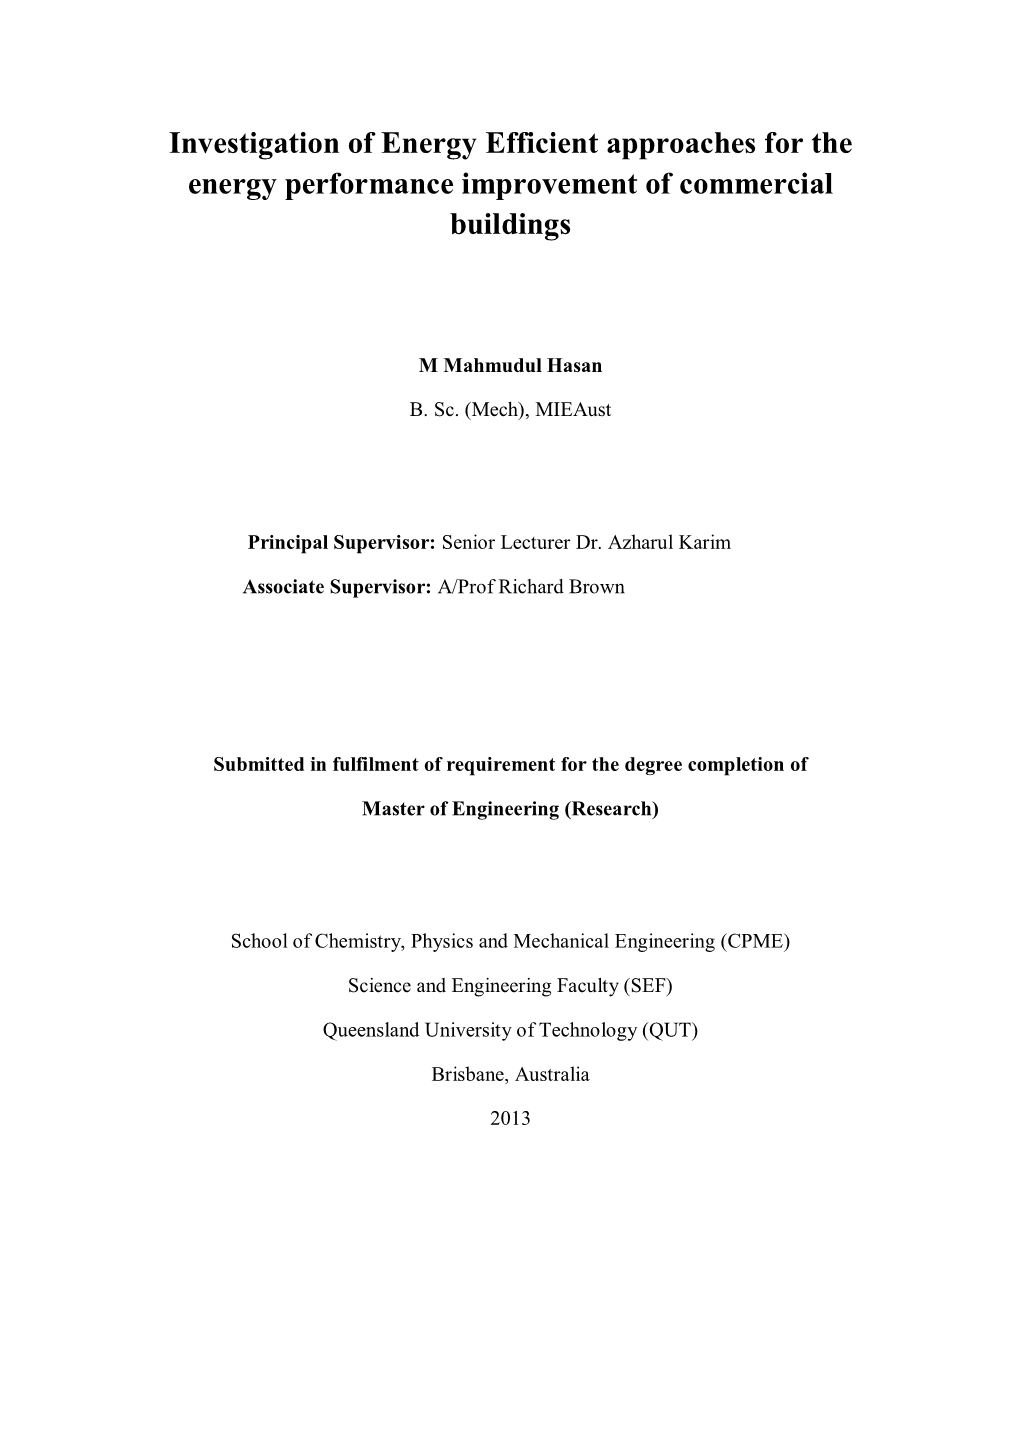 Investigation of Energy Efficient Approaches for the Energy Performance Improvement of Commercial Buildings